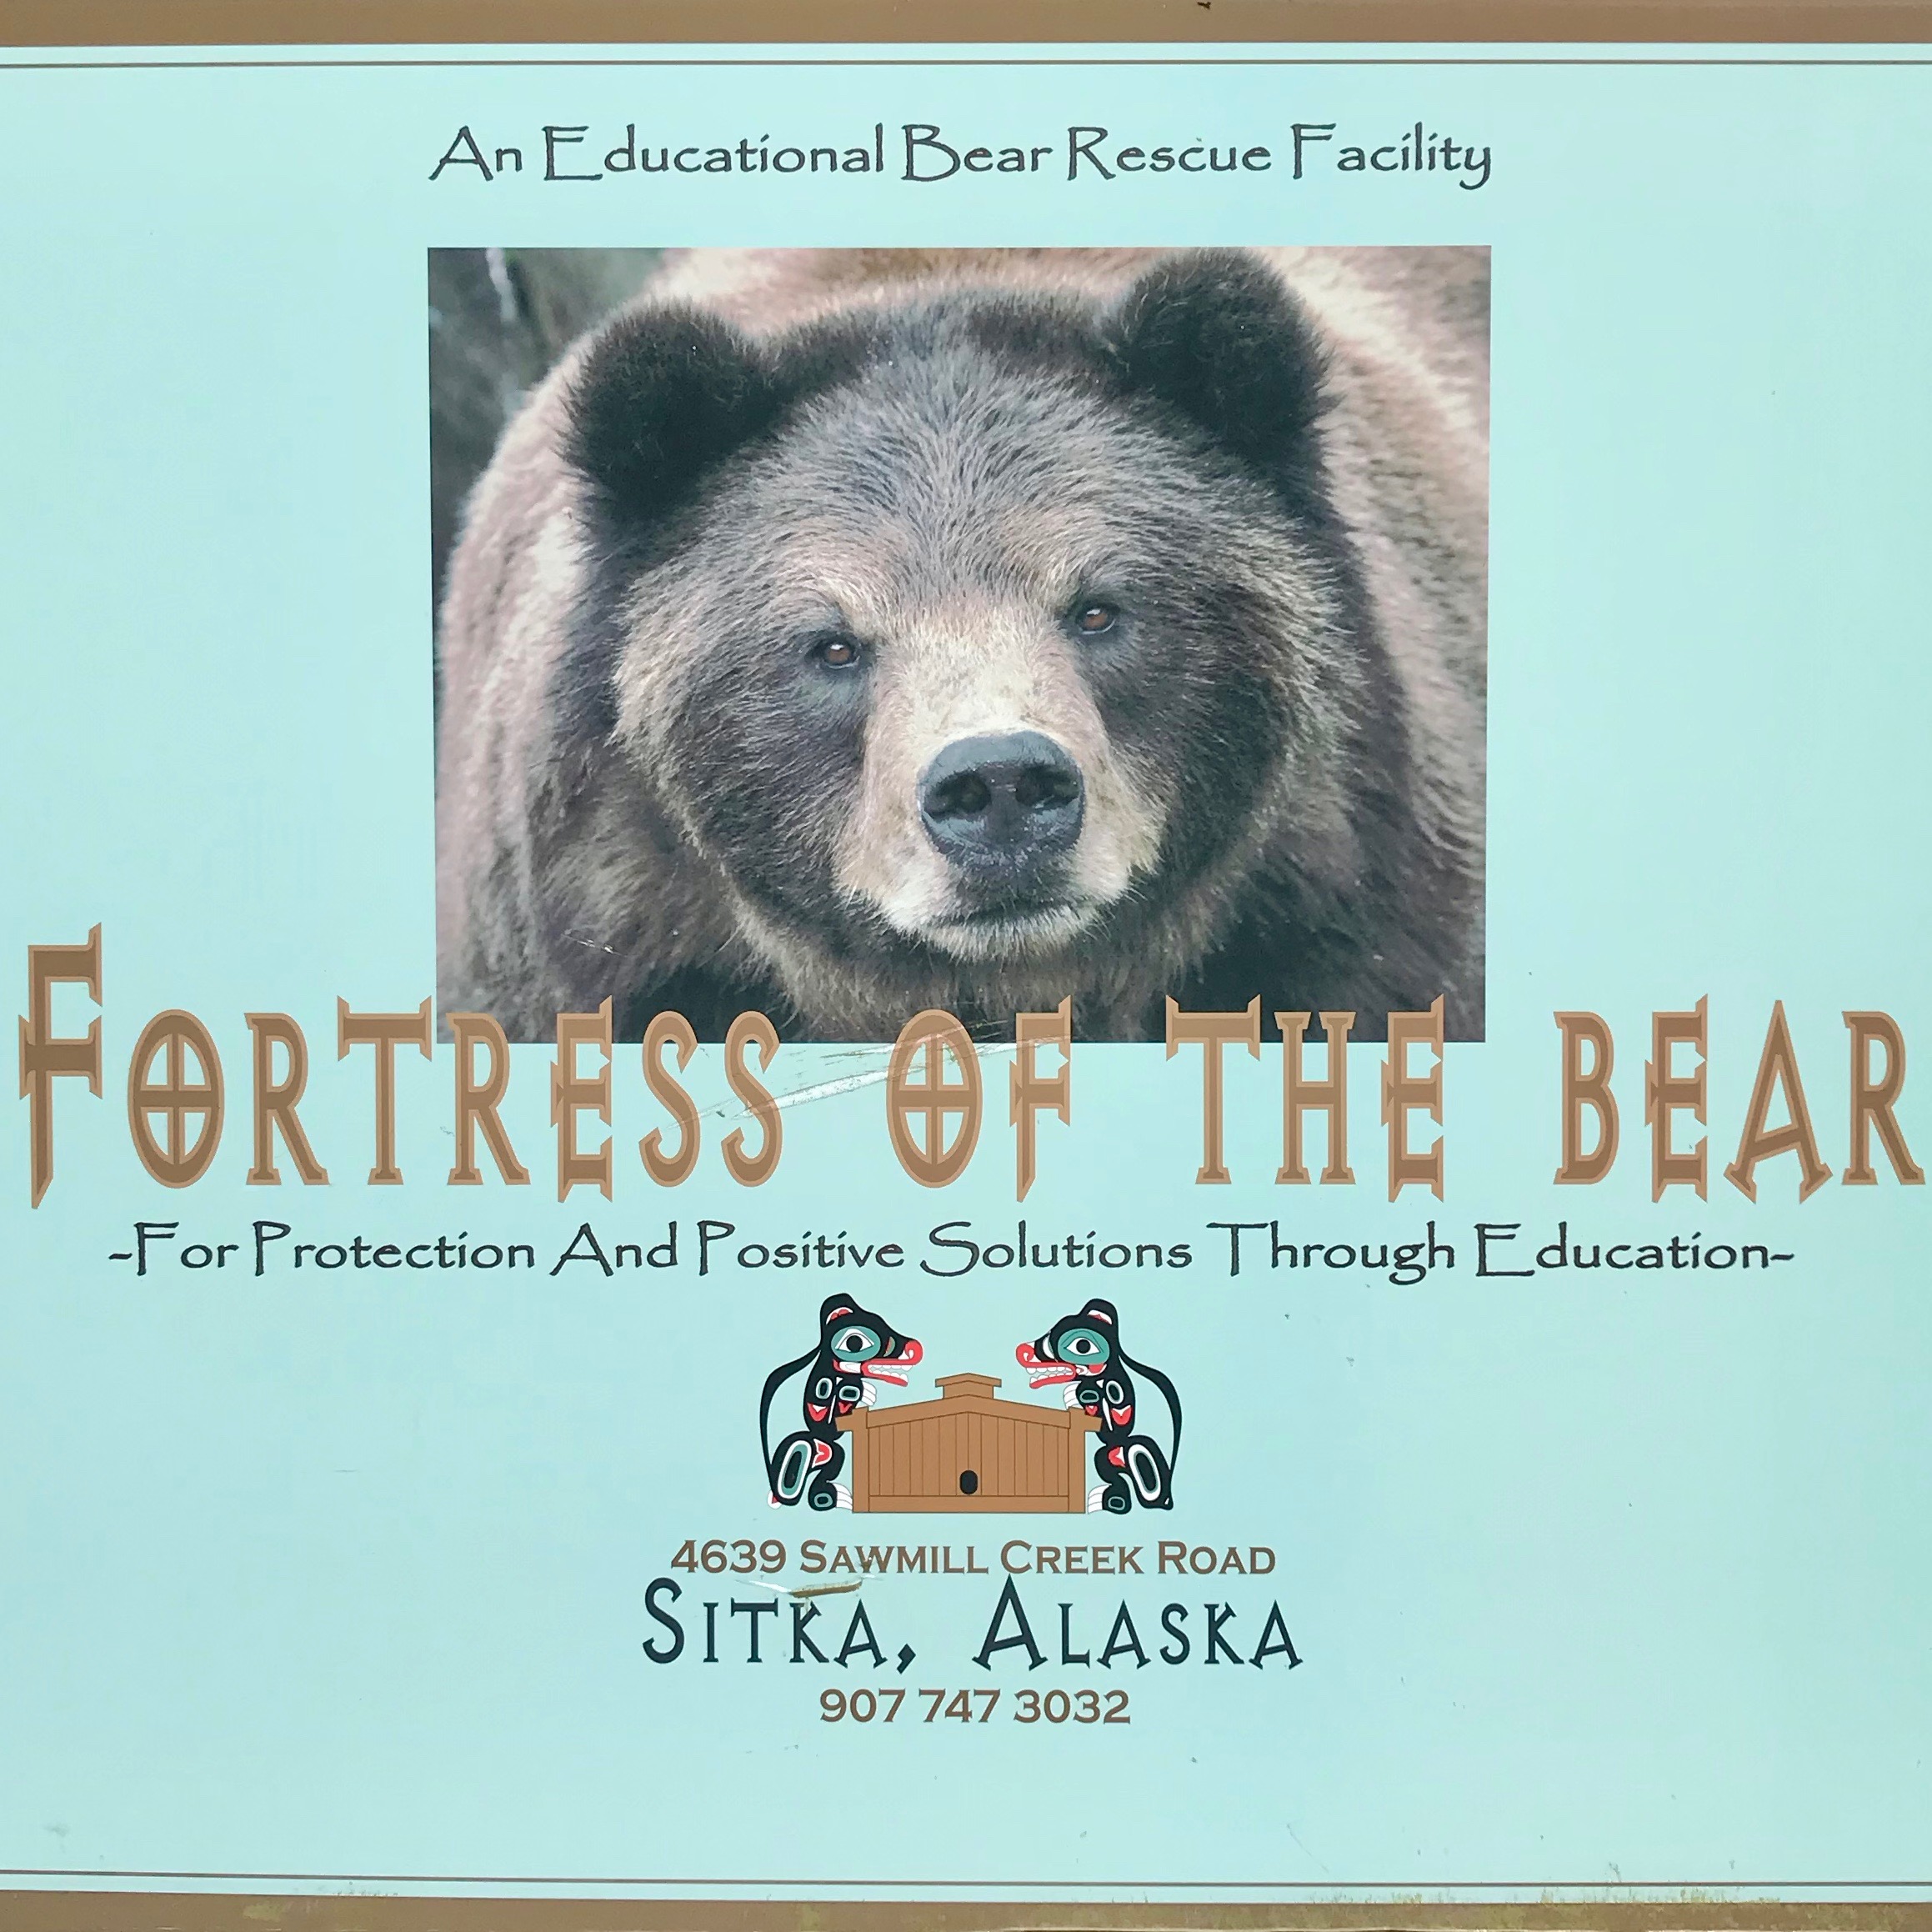 Fortress of the Bear is located about 5 miles out of Sika, Alaska town and entry is $15 for adults.  Cab ride there will run $20 each way. 